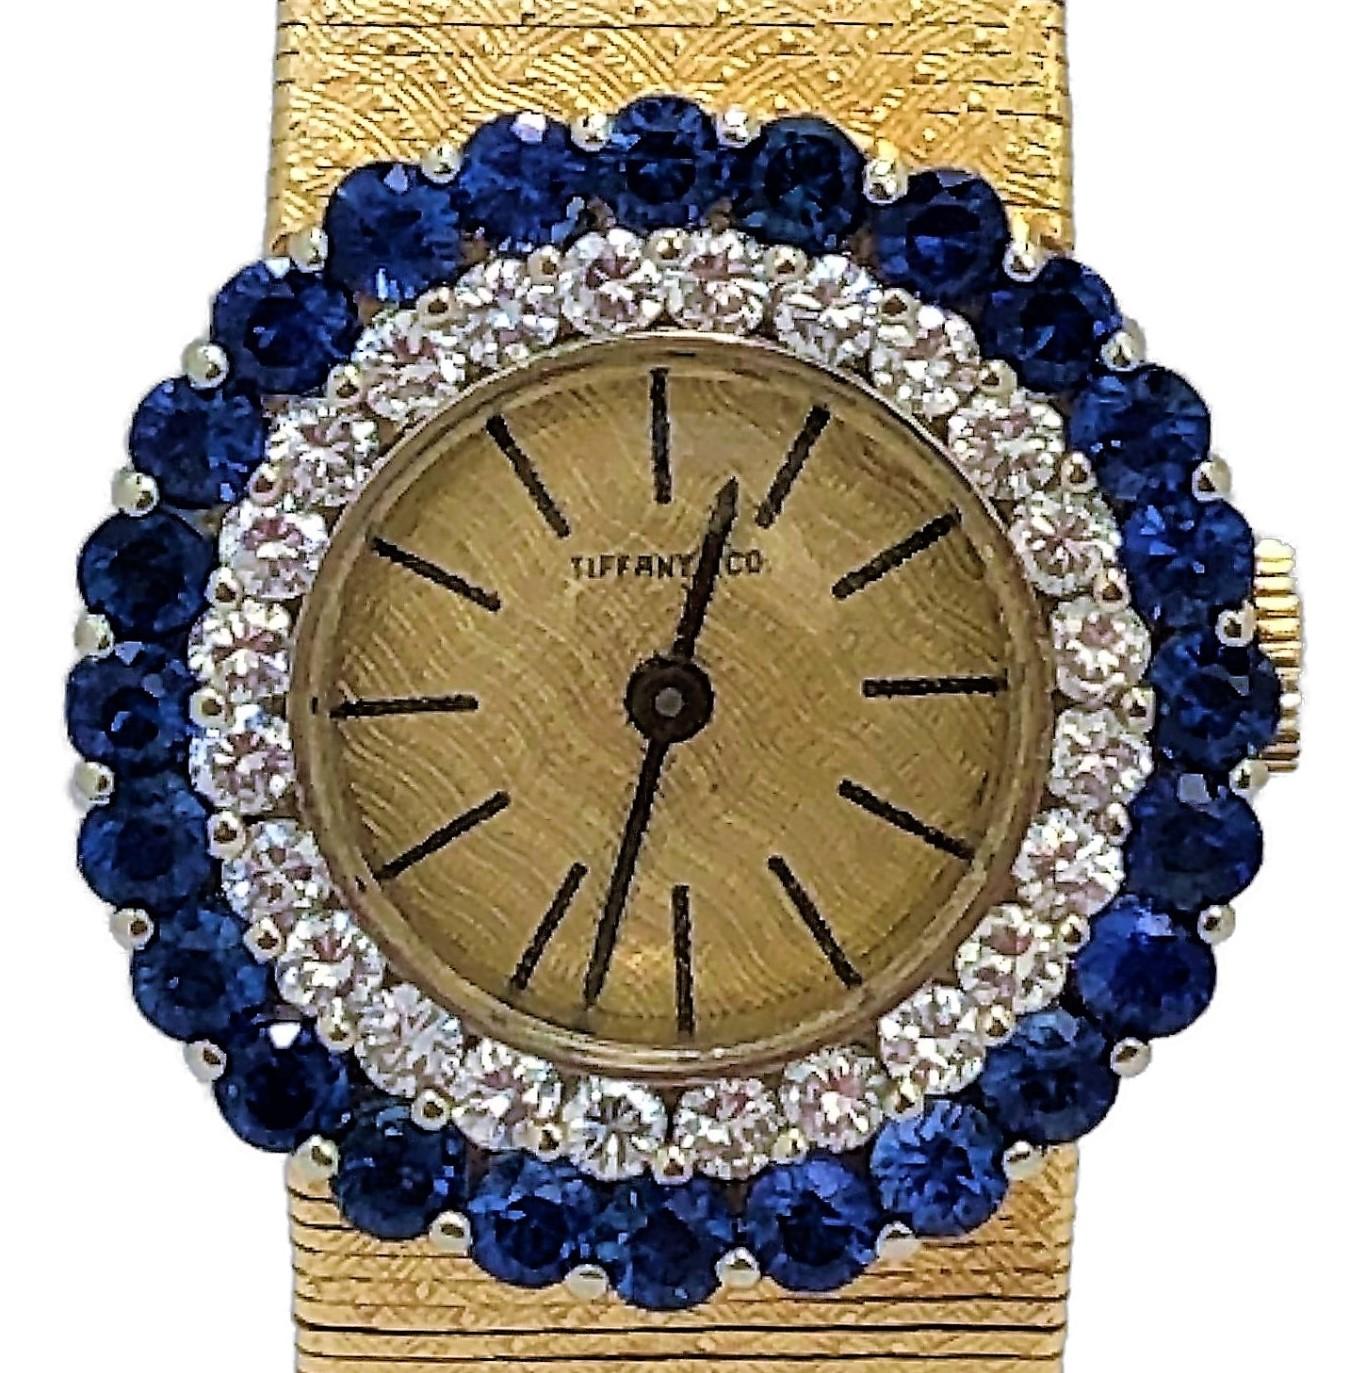 Tiffany & Co. Gold Watch with One Diamond Bezel and One Sapphire Bezel 1